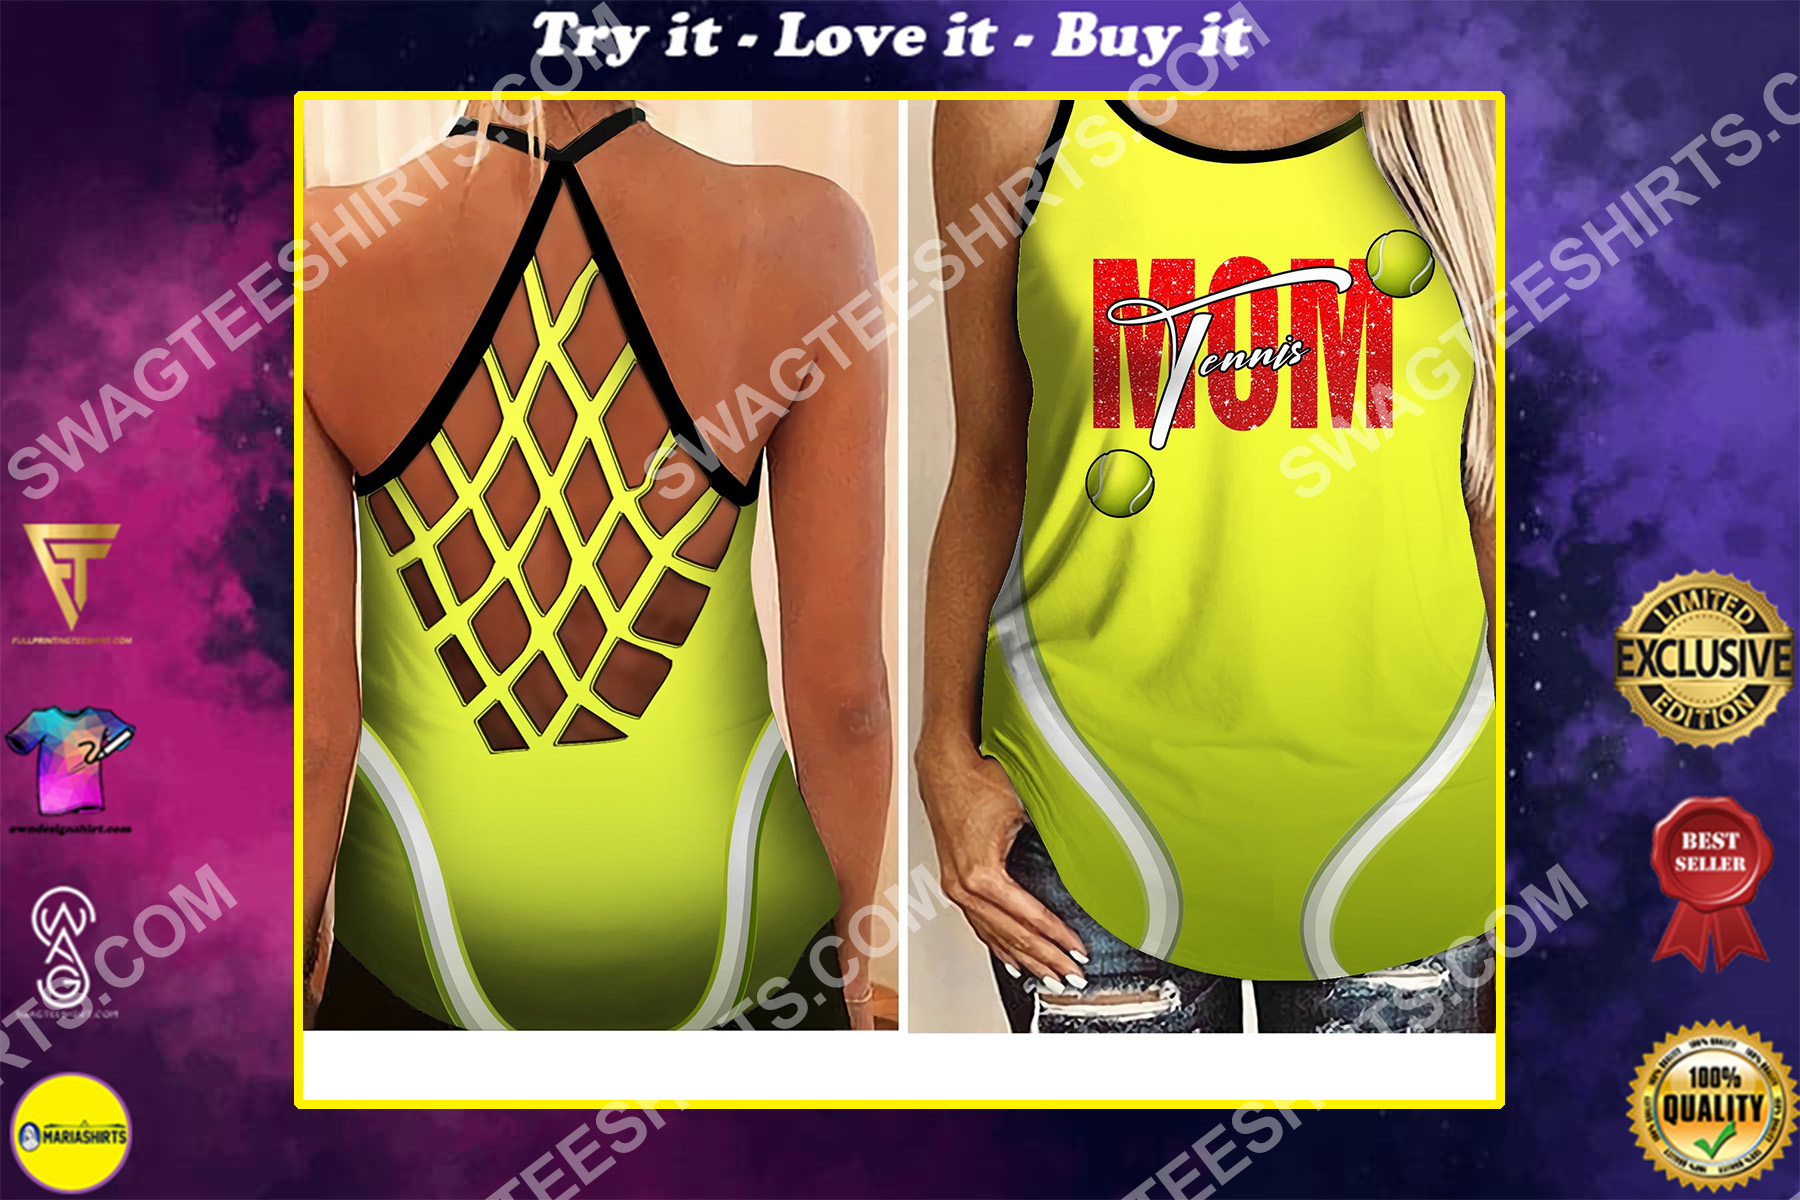 tennis mom all over printed criss-cross tank top